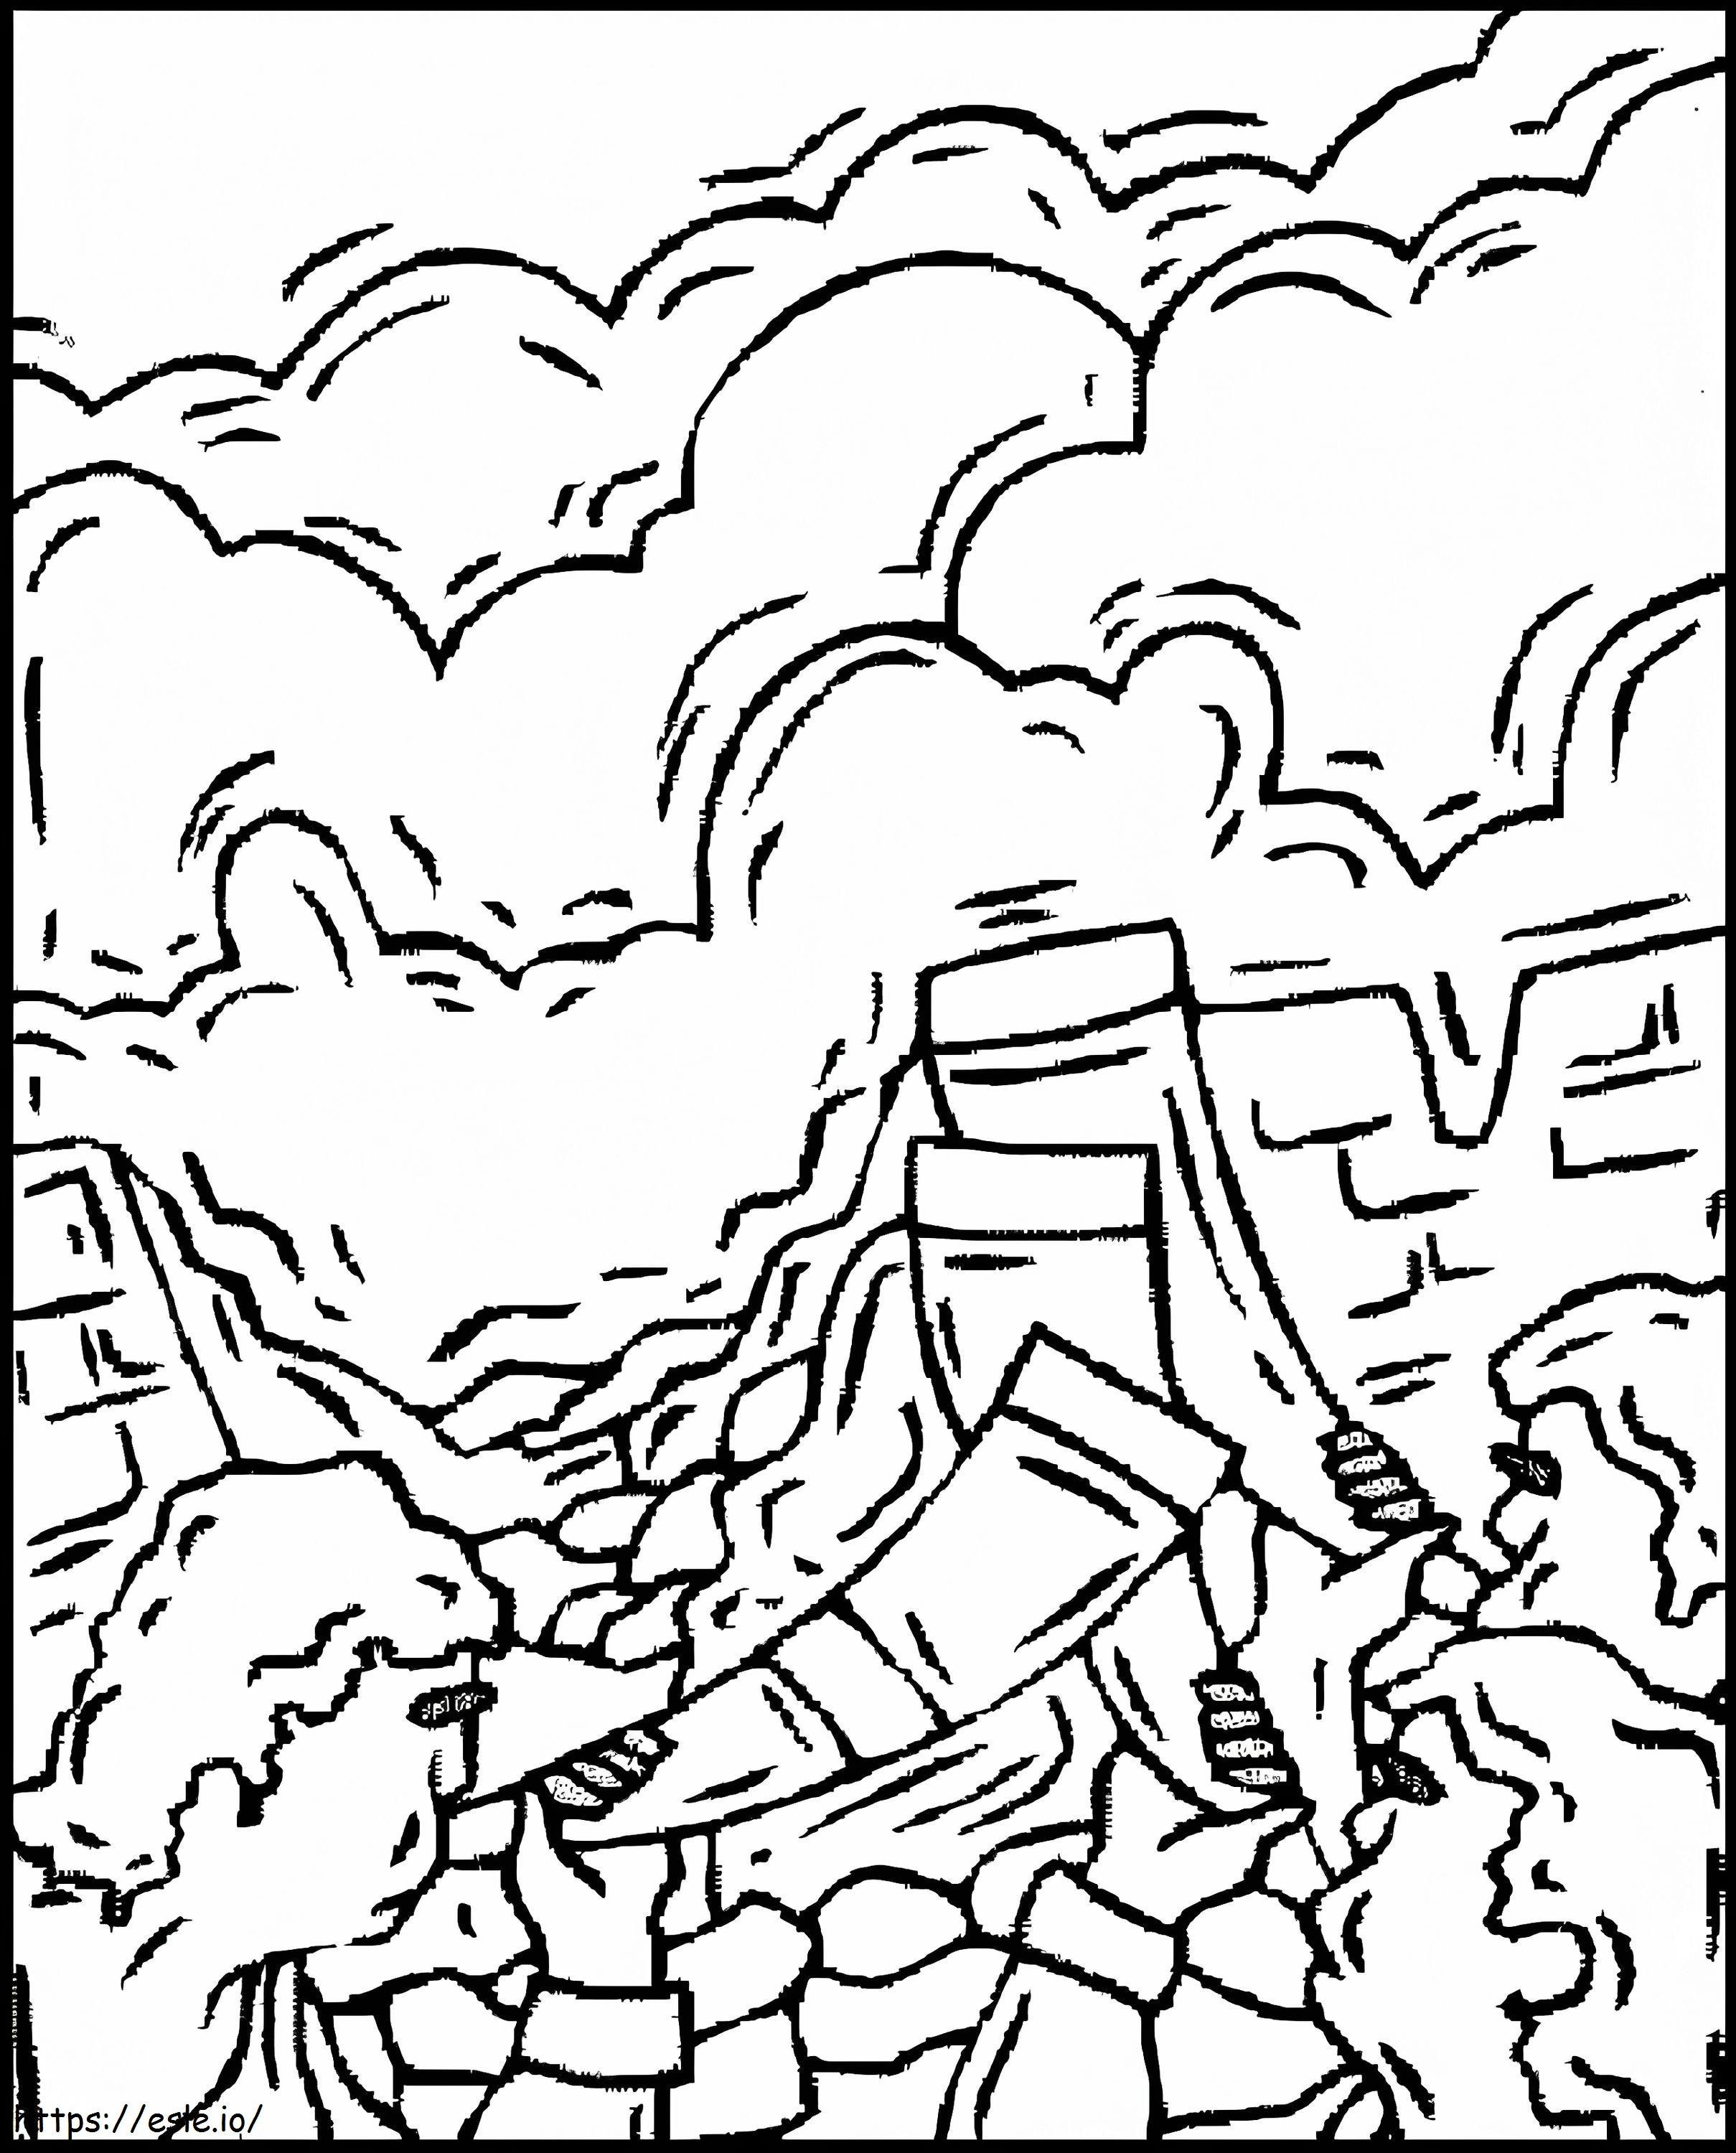 Horns At Jericho coloring page